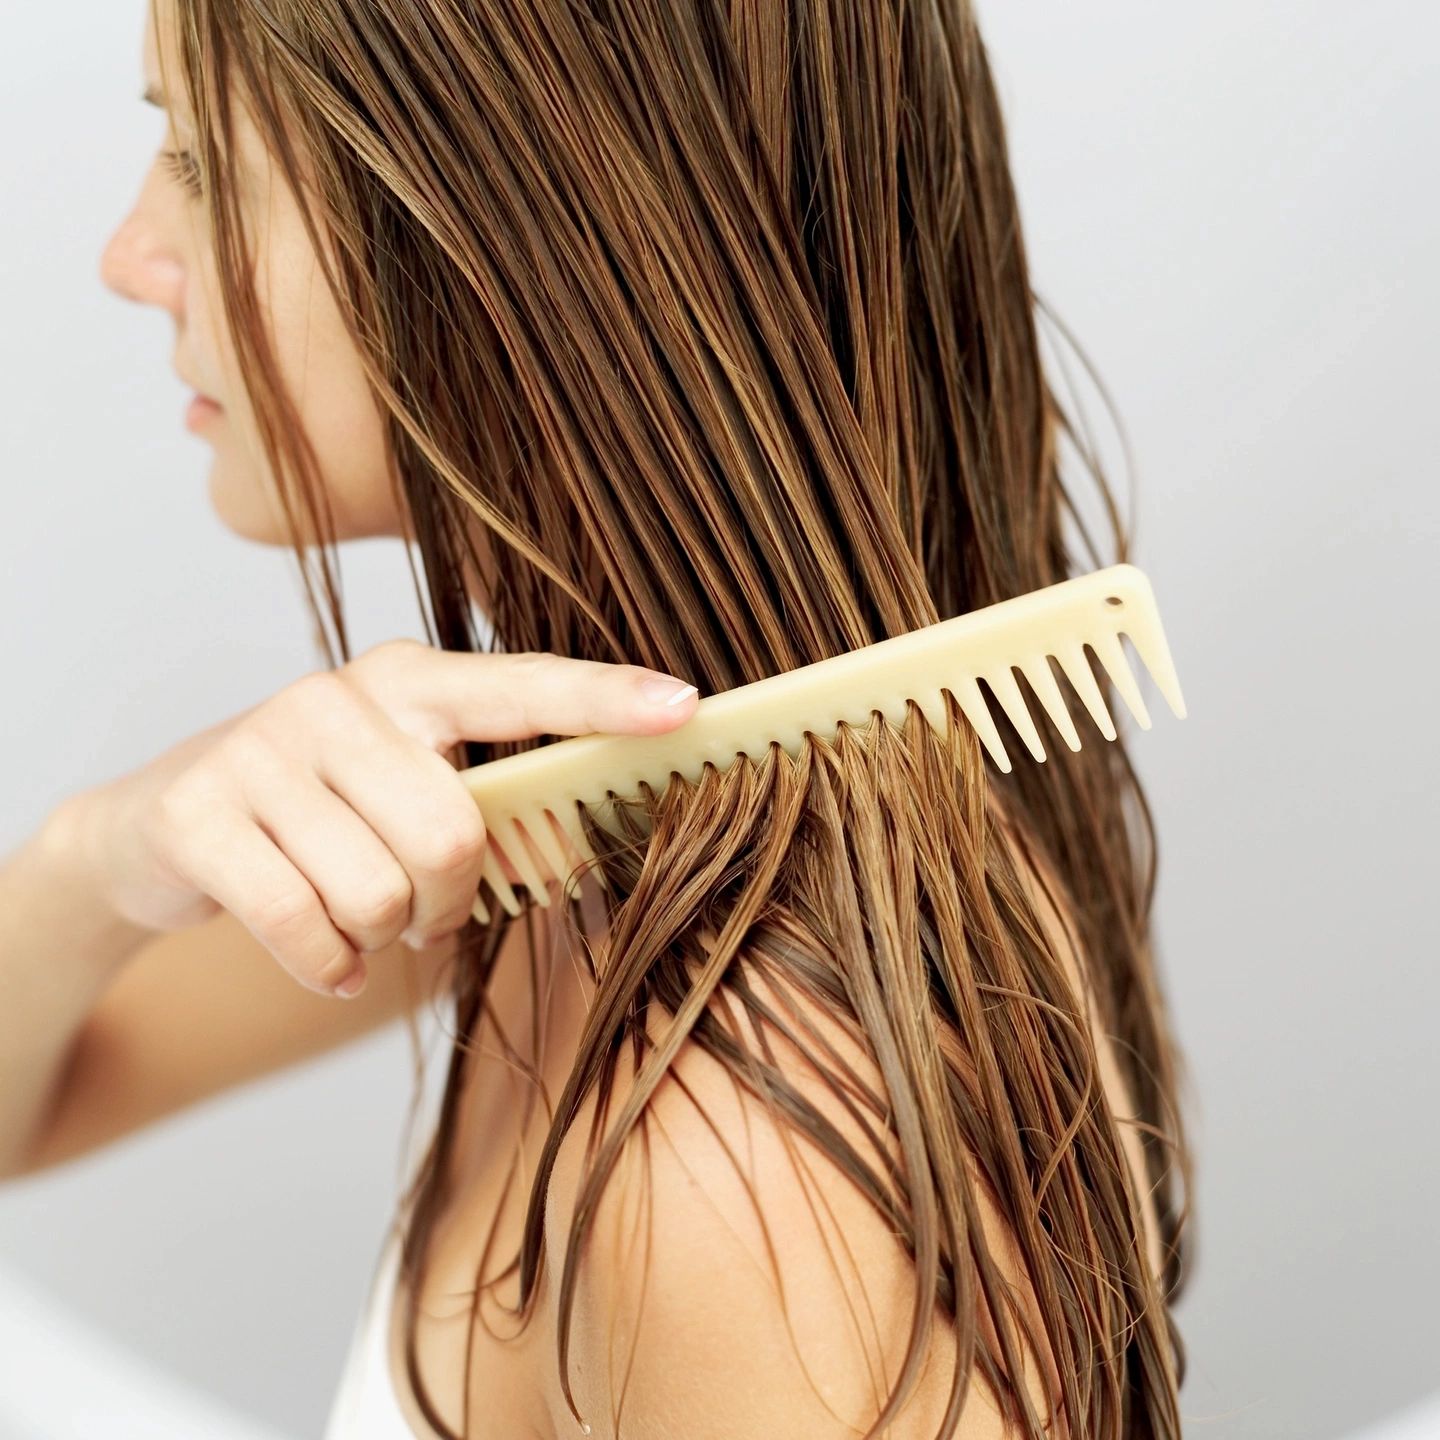 Side profile of a woman with brown hair using a tan-skin colored comb to brush her wet hair.